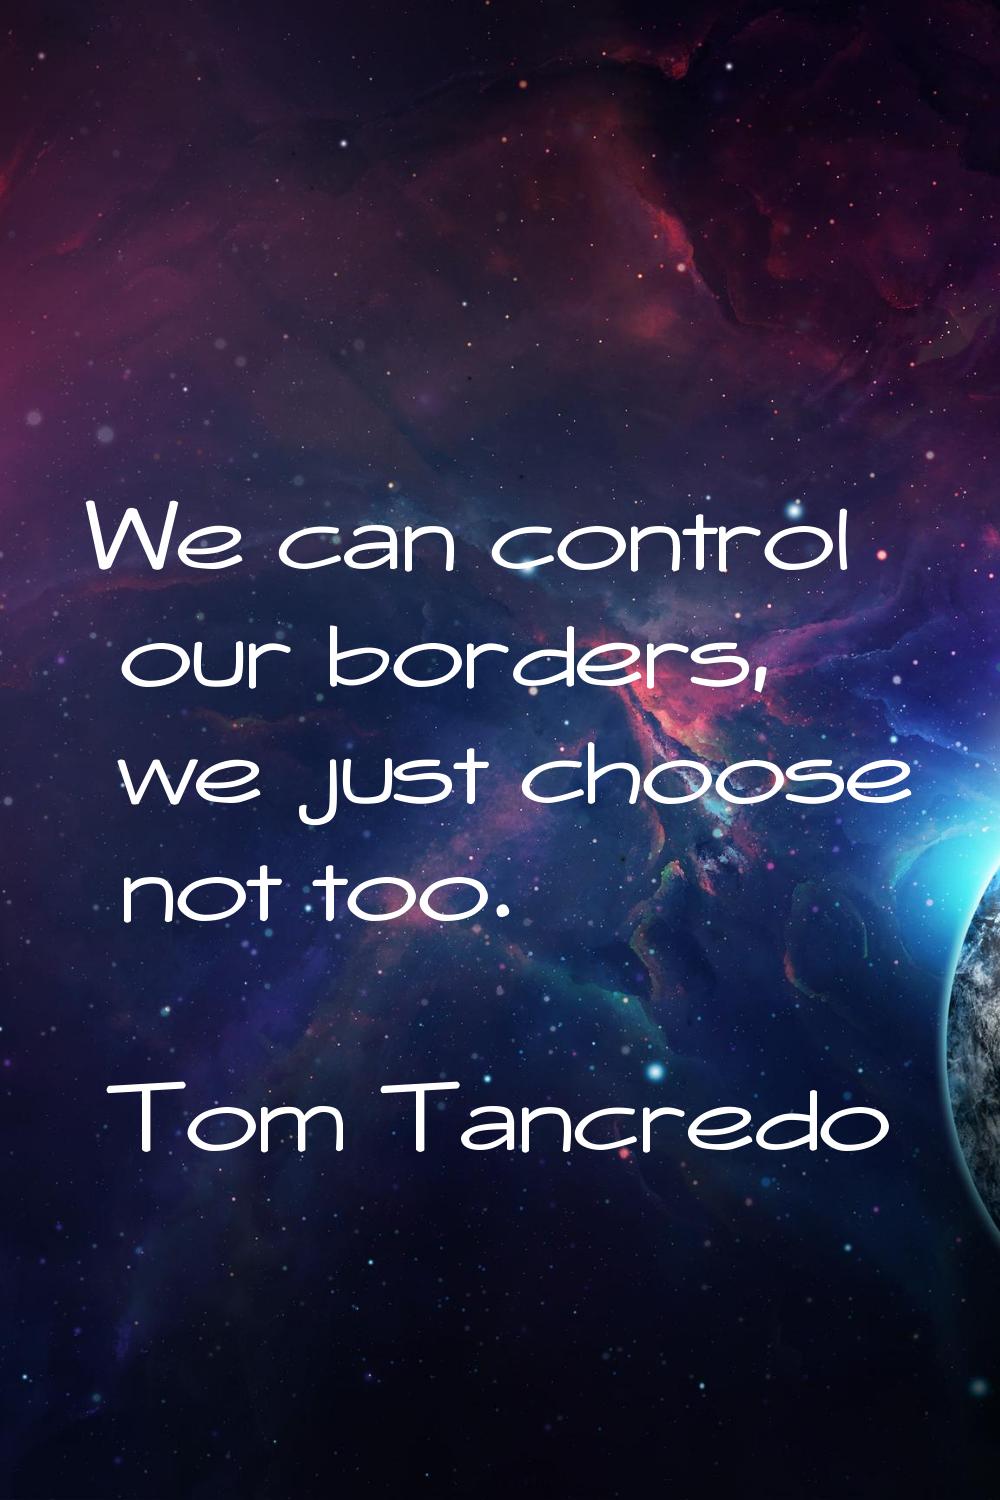 We can control our borders, we just choose not too.